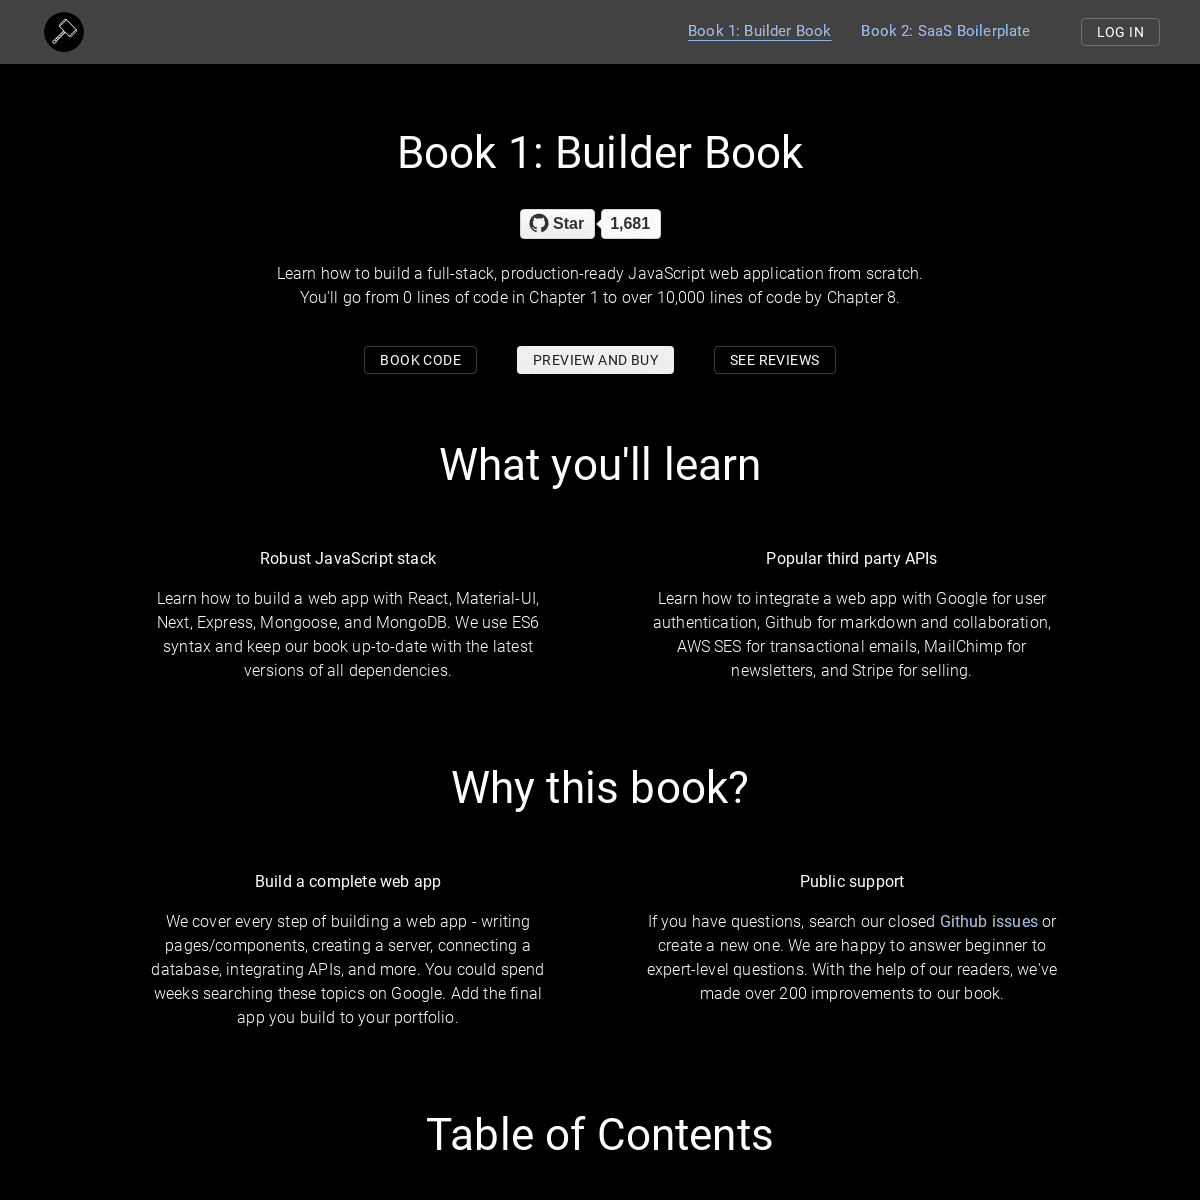 A complete backup of builderbook.org